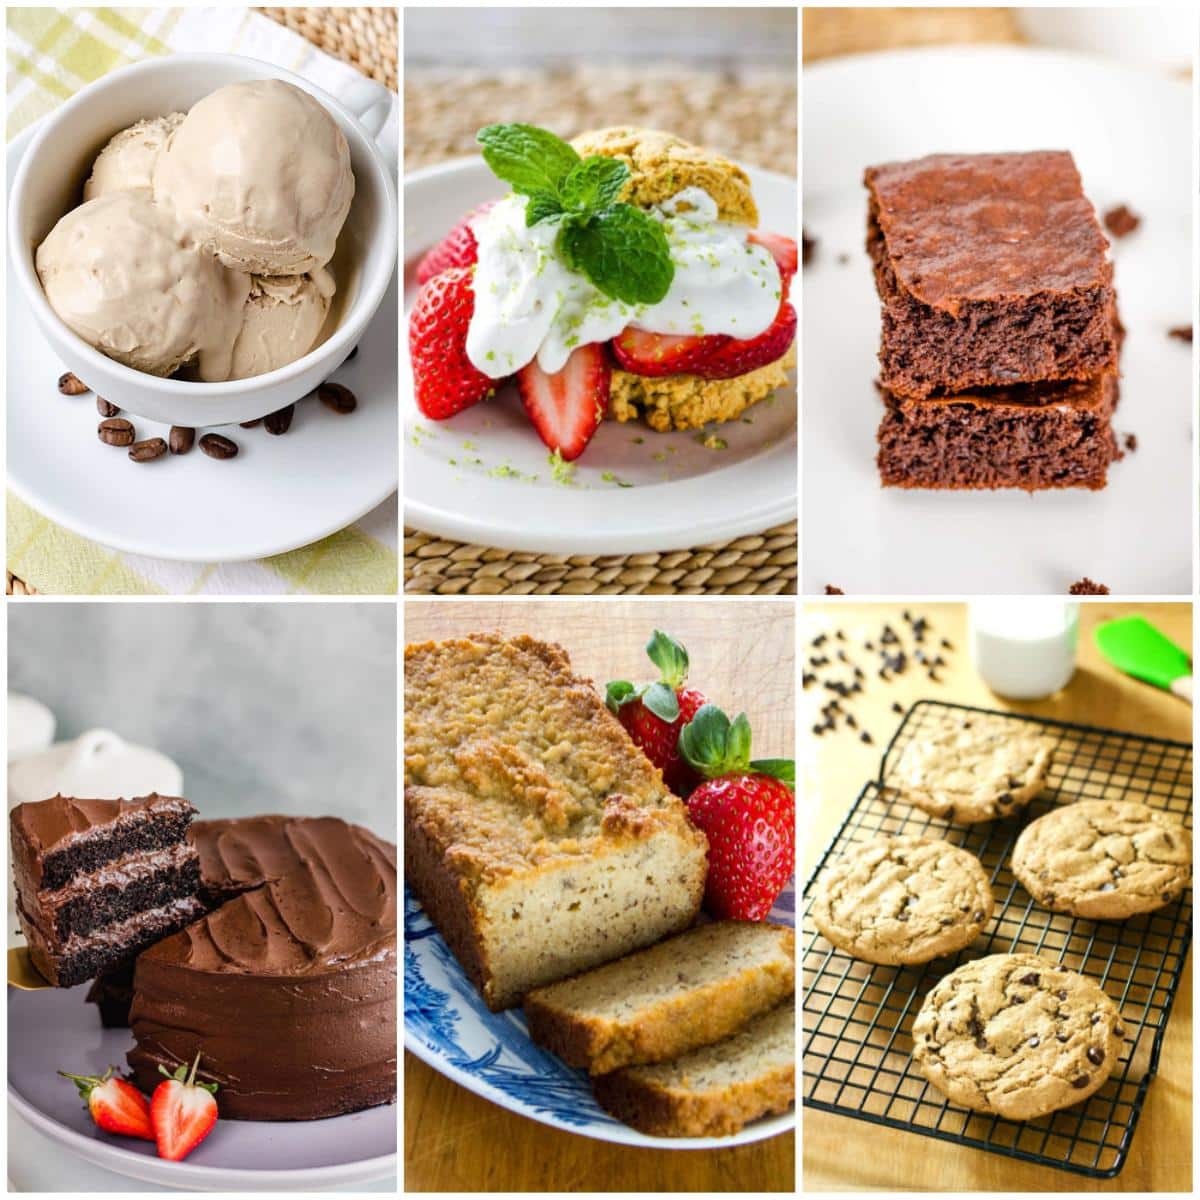 25 Easy and Delicious Gluten Free Dessert Recipes - Cook Eat Well